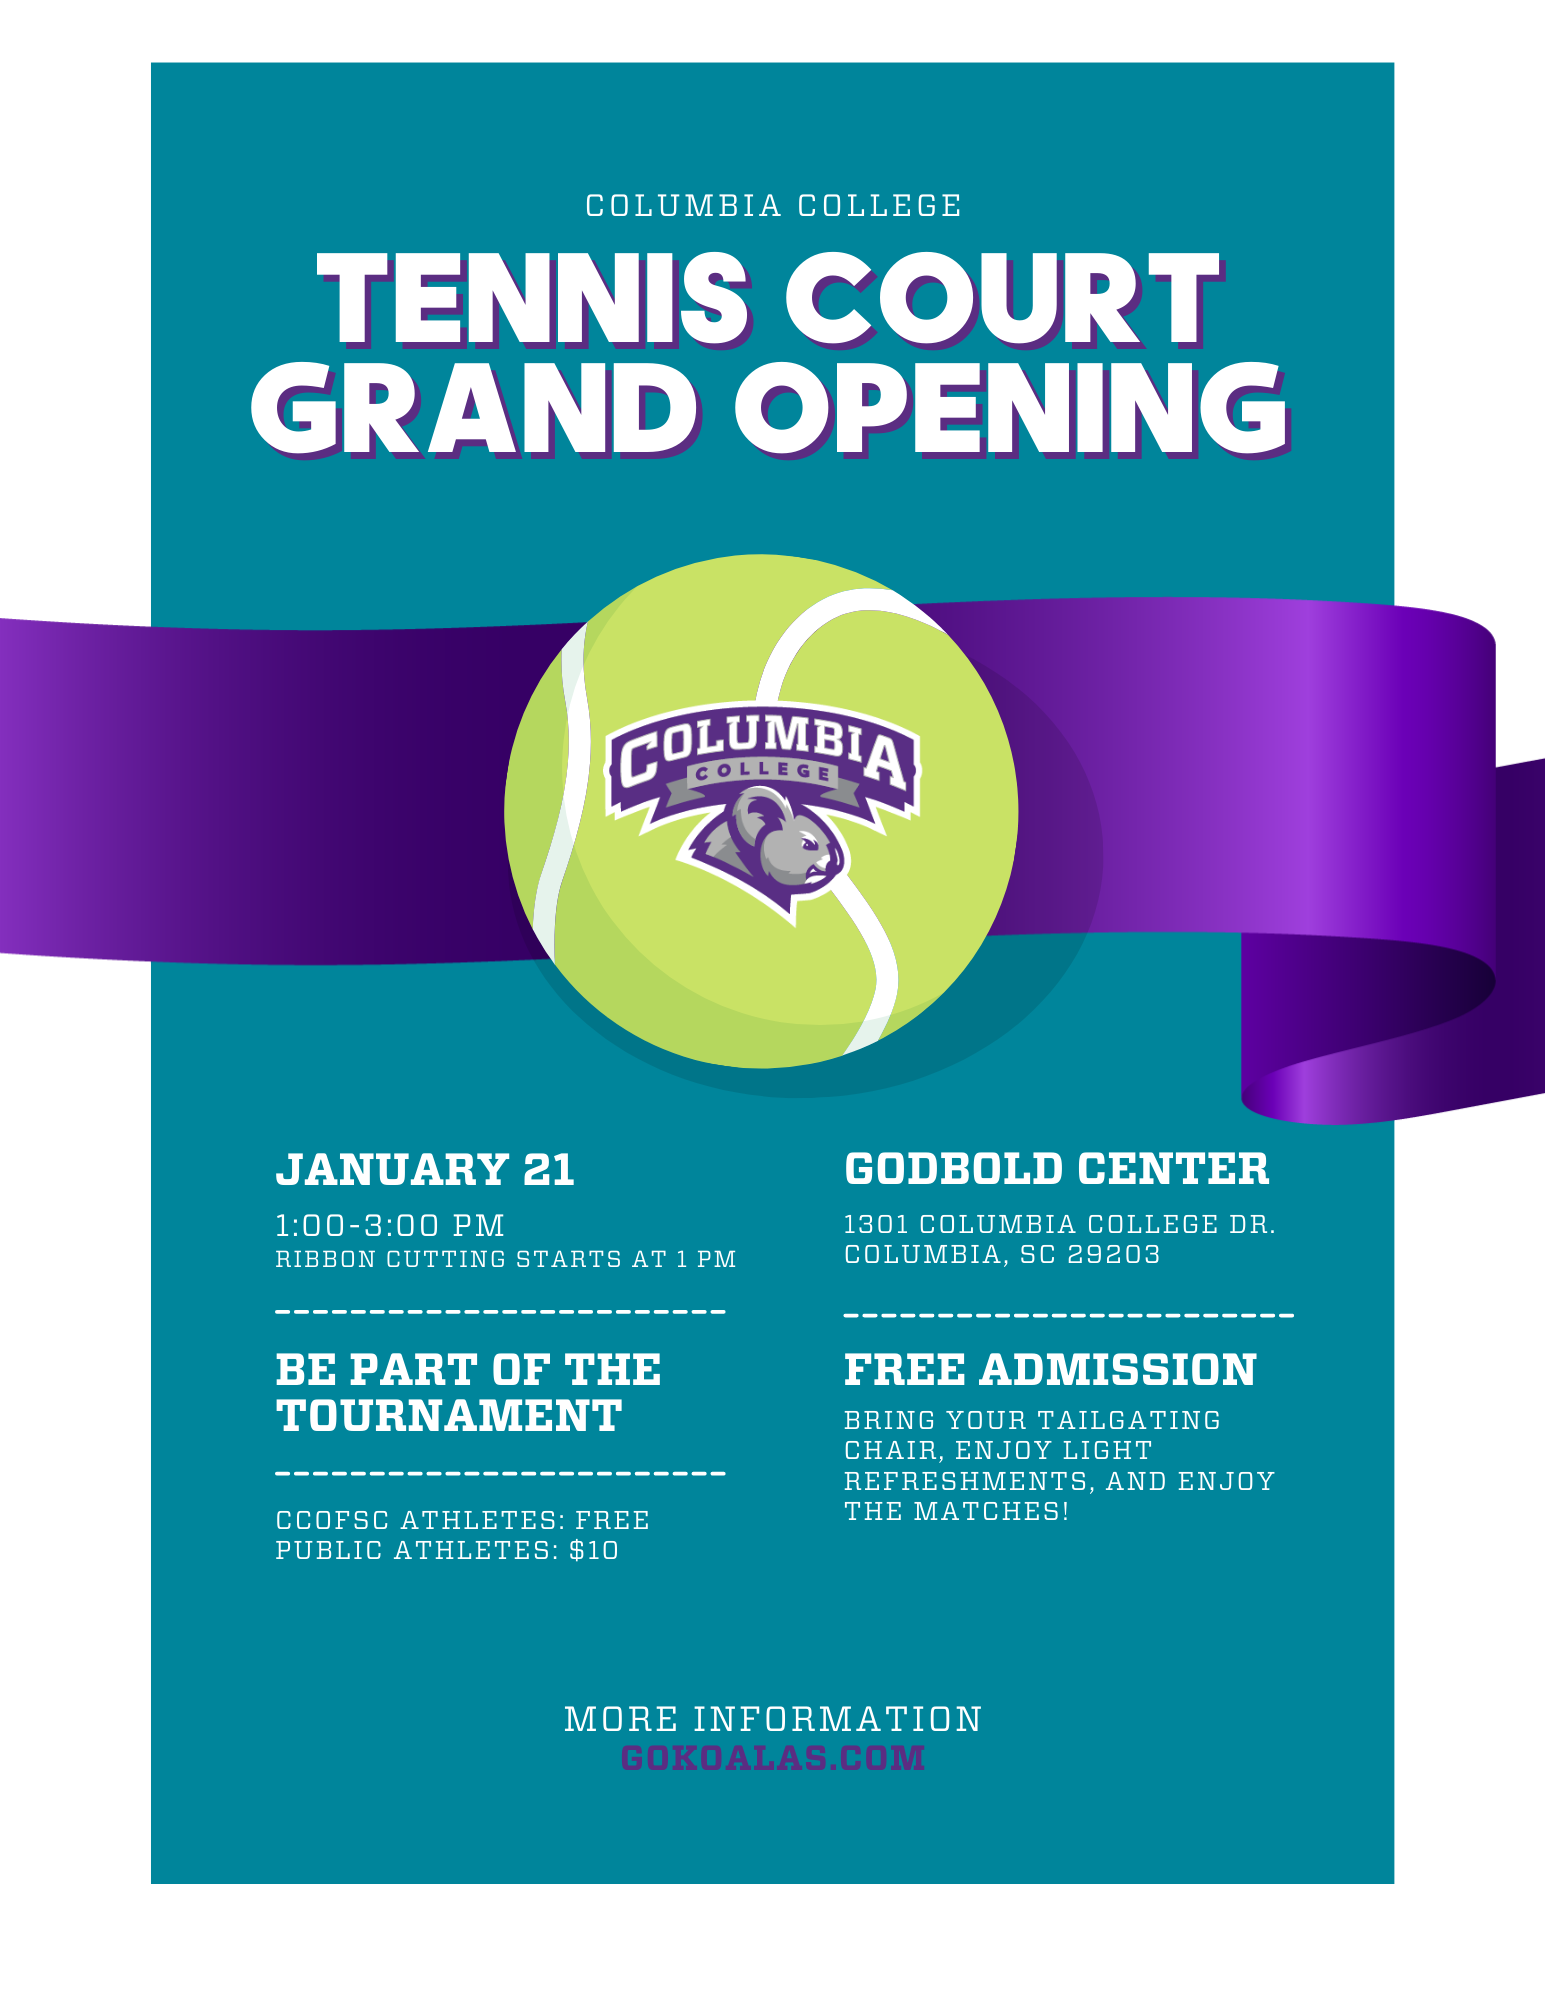 Columbia College will celebrate its new tennis courts Jan. 21.